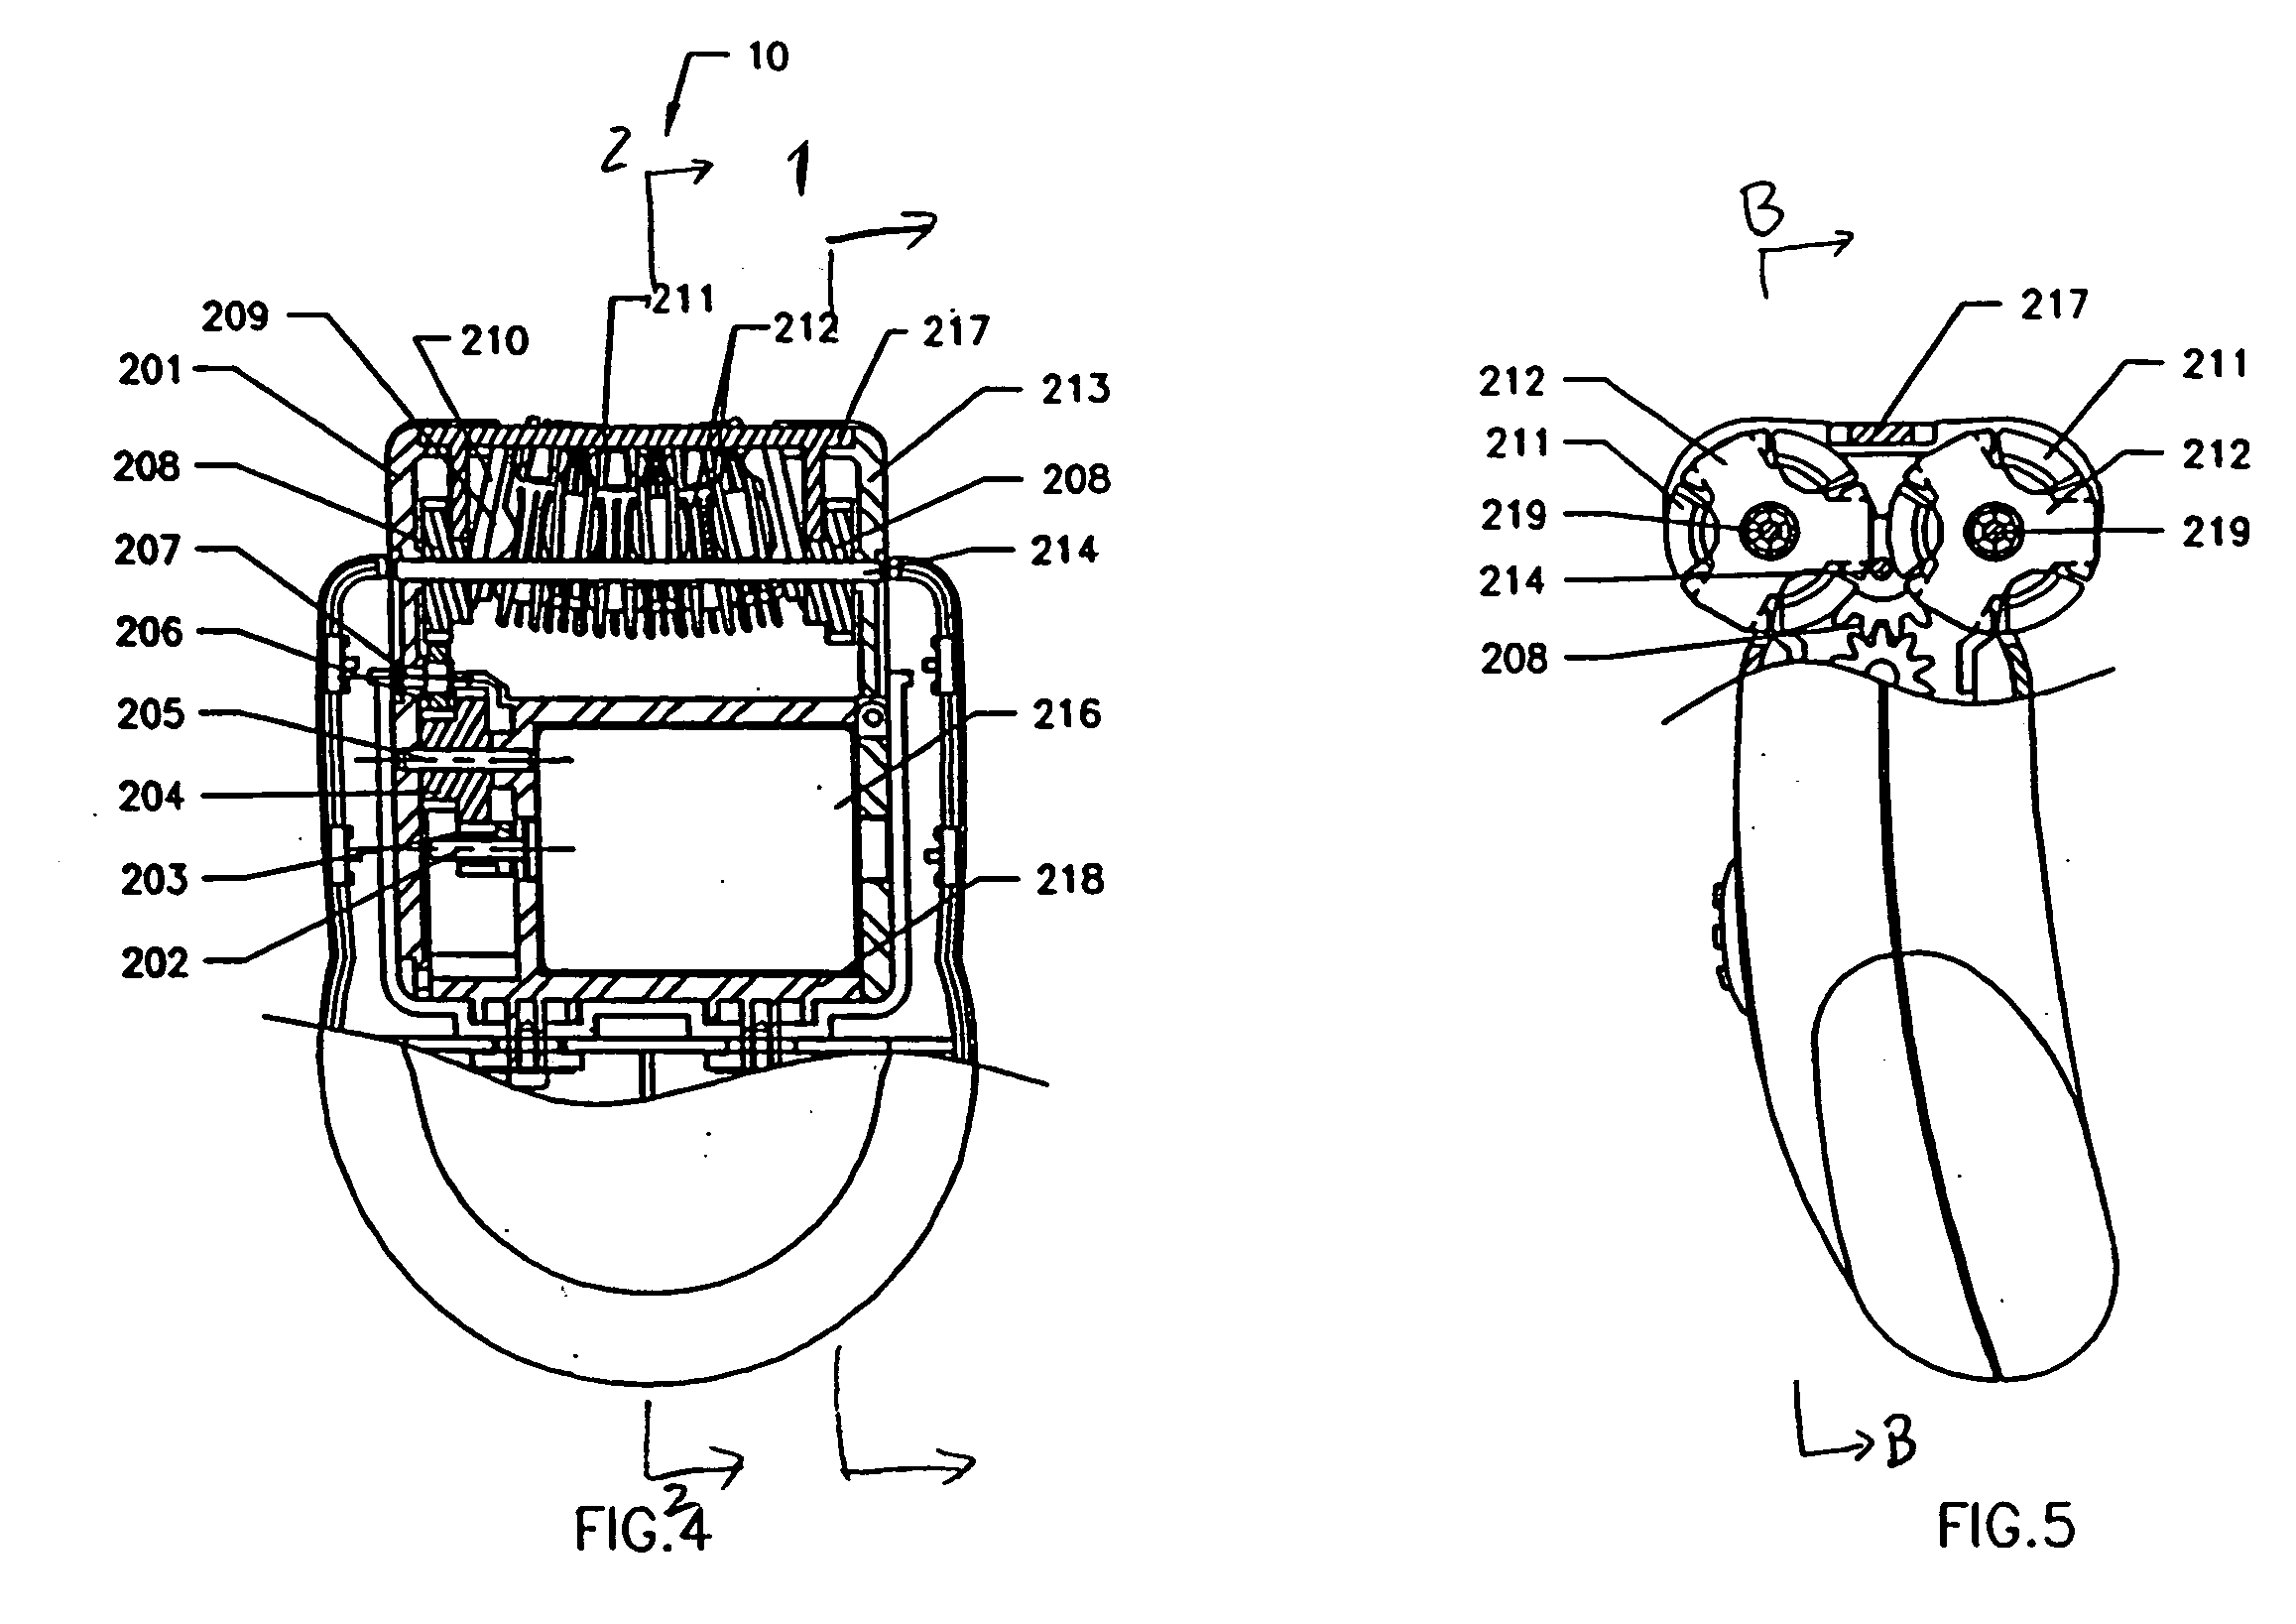 Hair removal device with disc and vibration assemblies